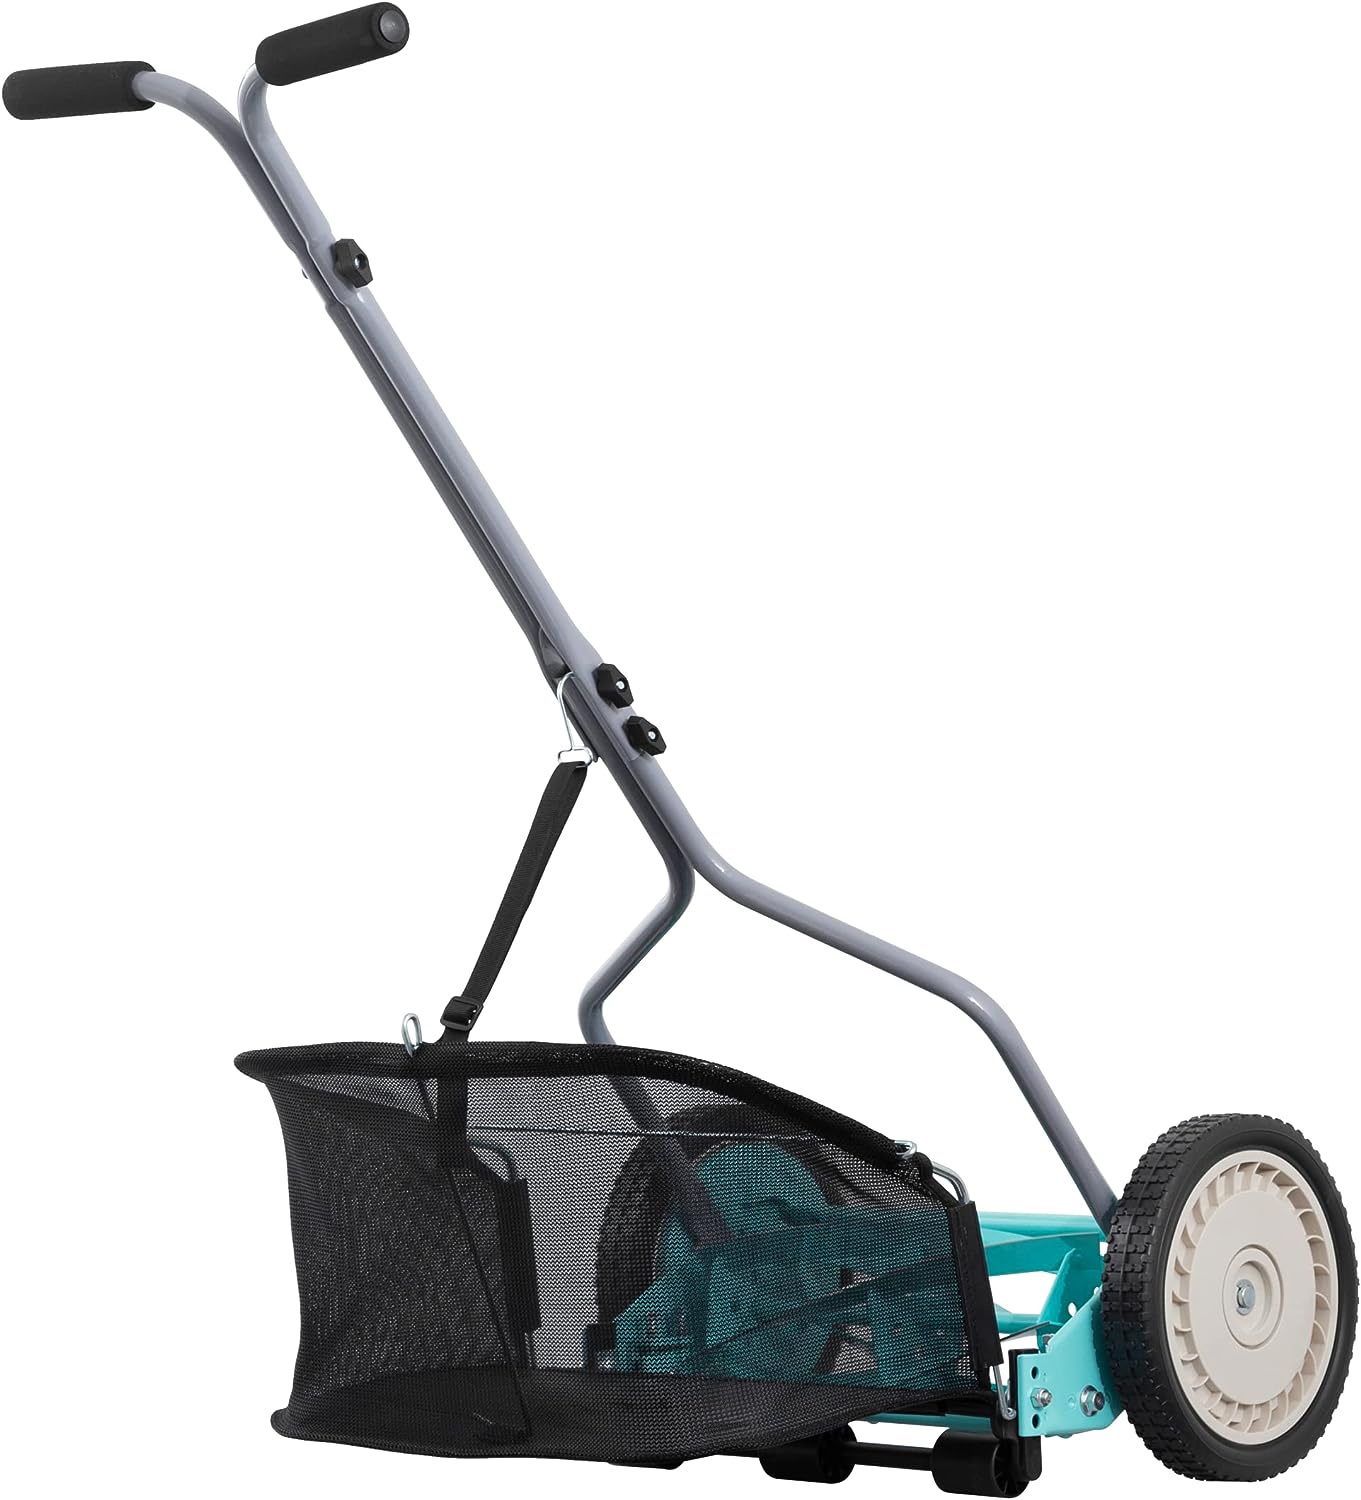 American Lawn Mower Company 1304-14GC 14-Inch 5-Blade Push Reel Lawn Mower  with Grass Catcher, Mint